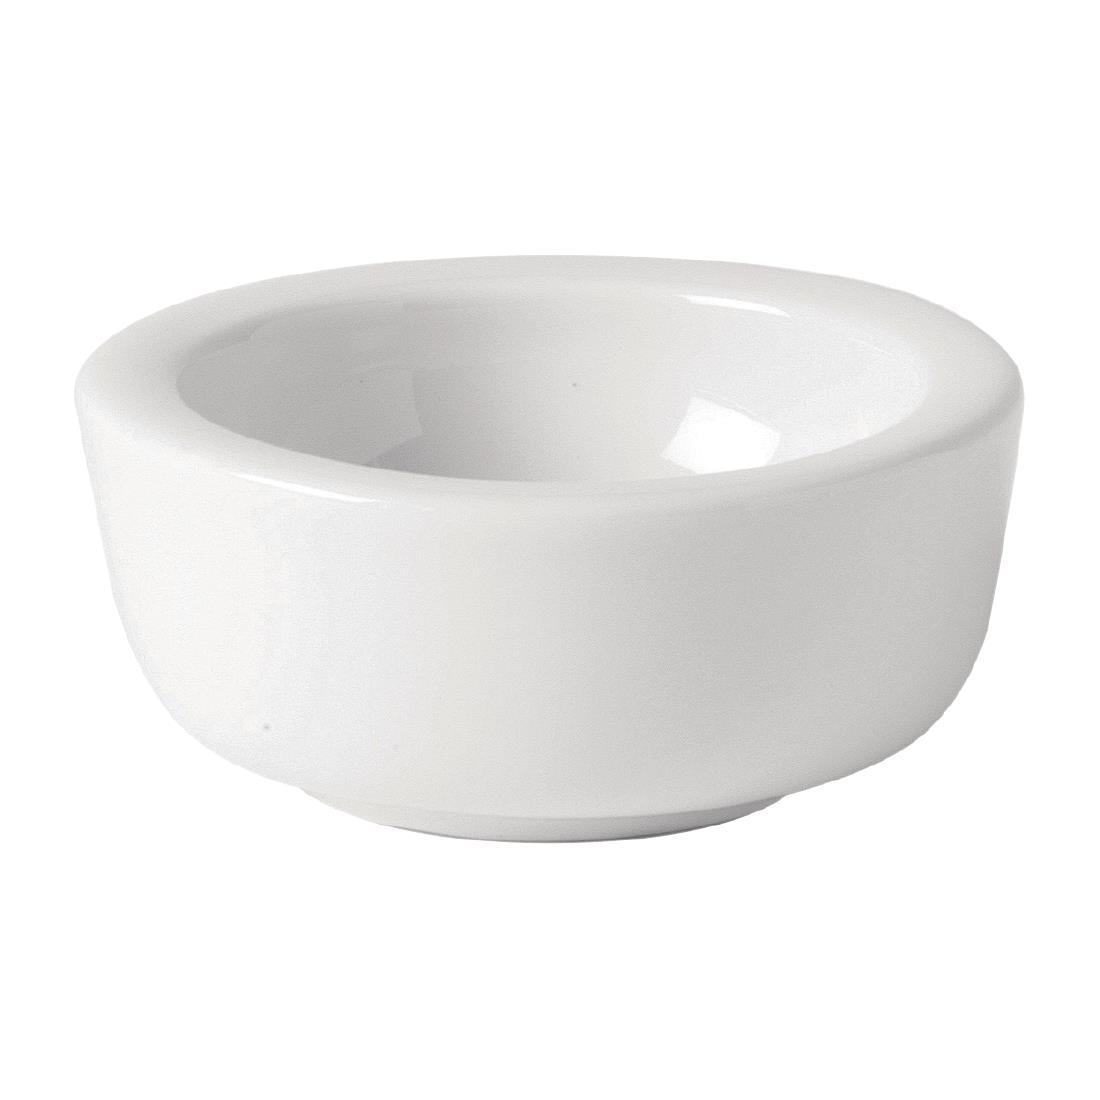 Utopia Titan Butter Dishes White 65mm (Pack of 6) - CW265  - 1